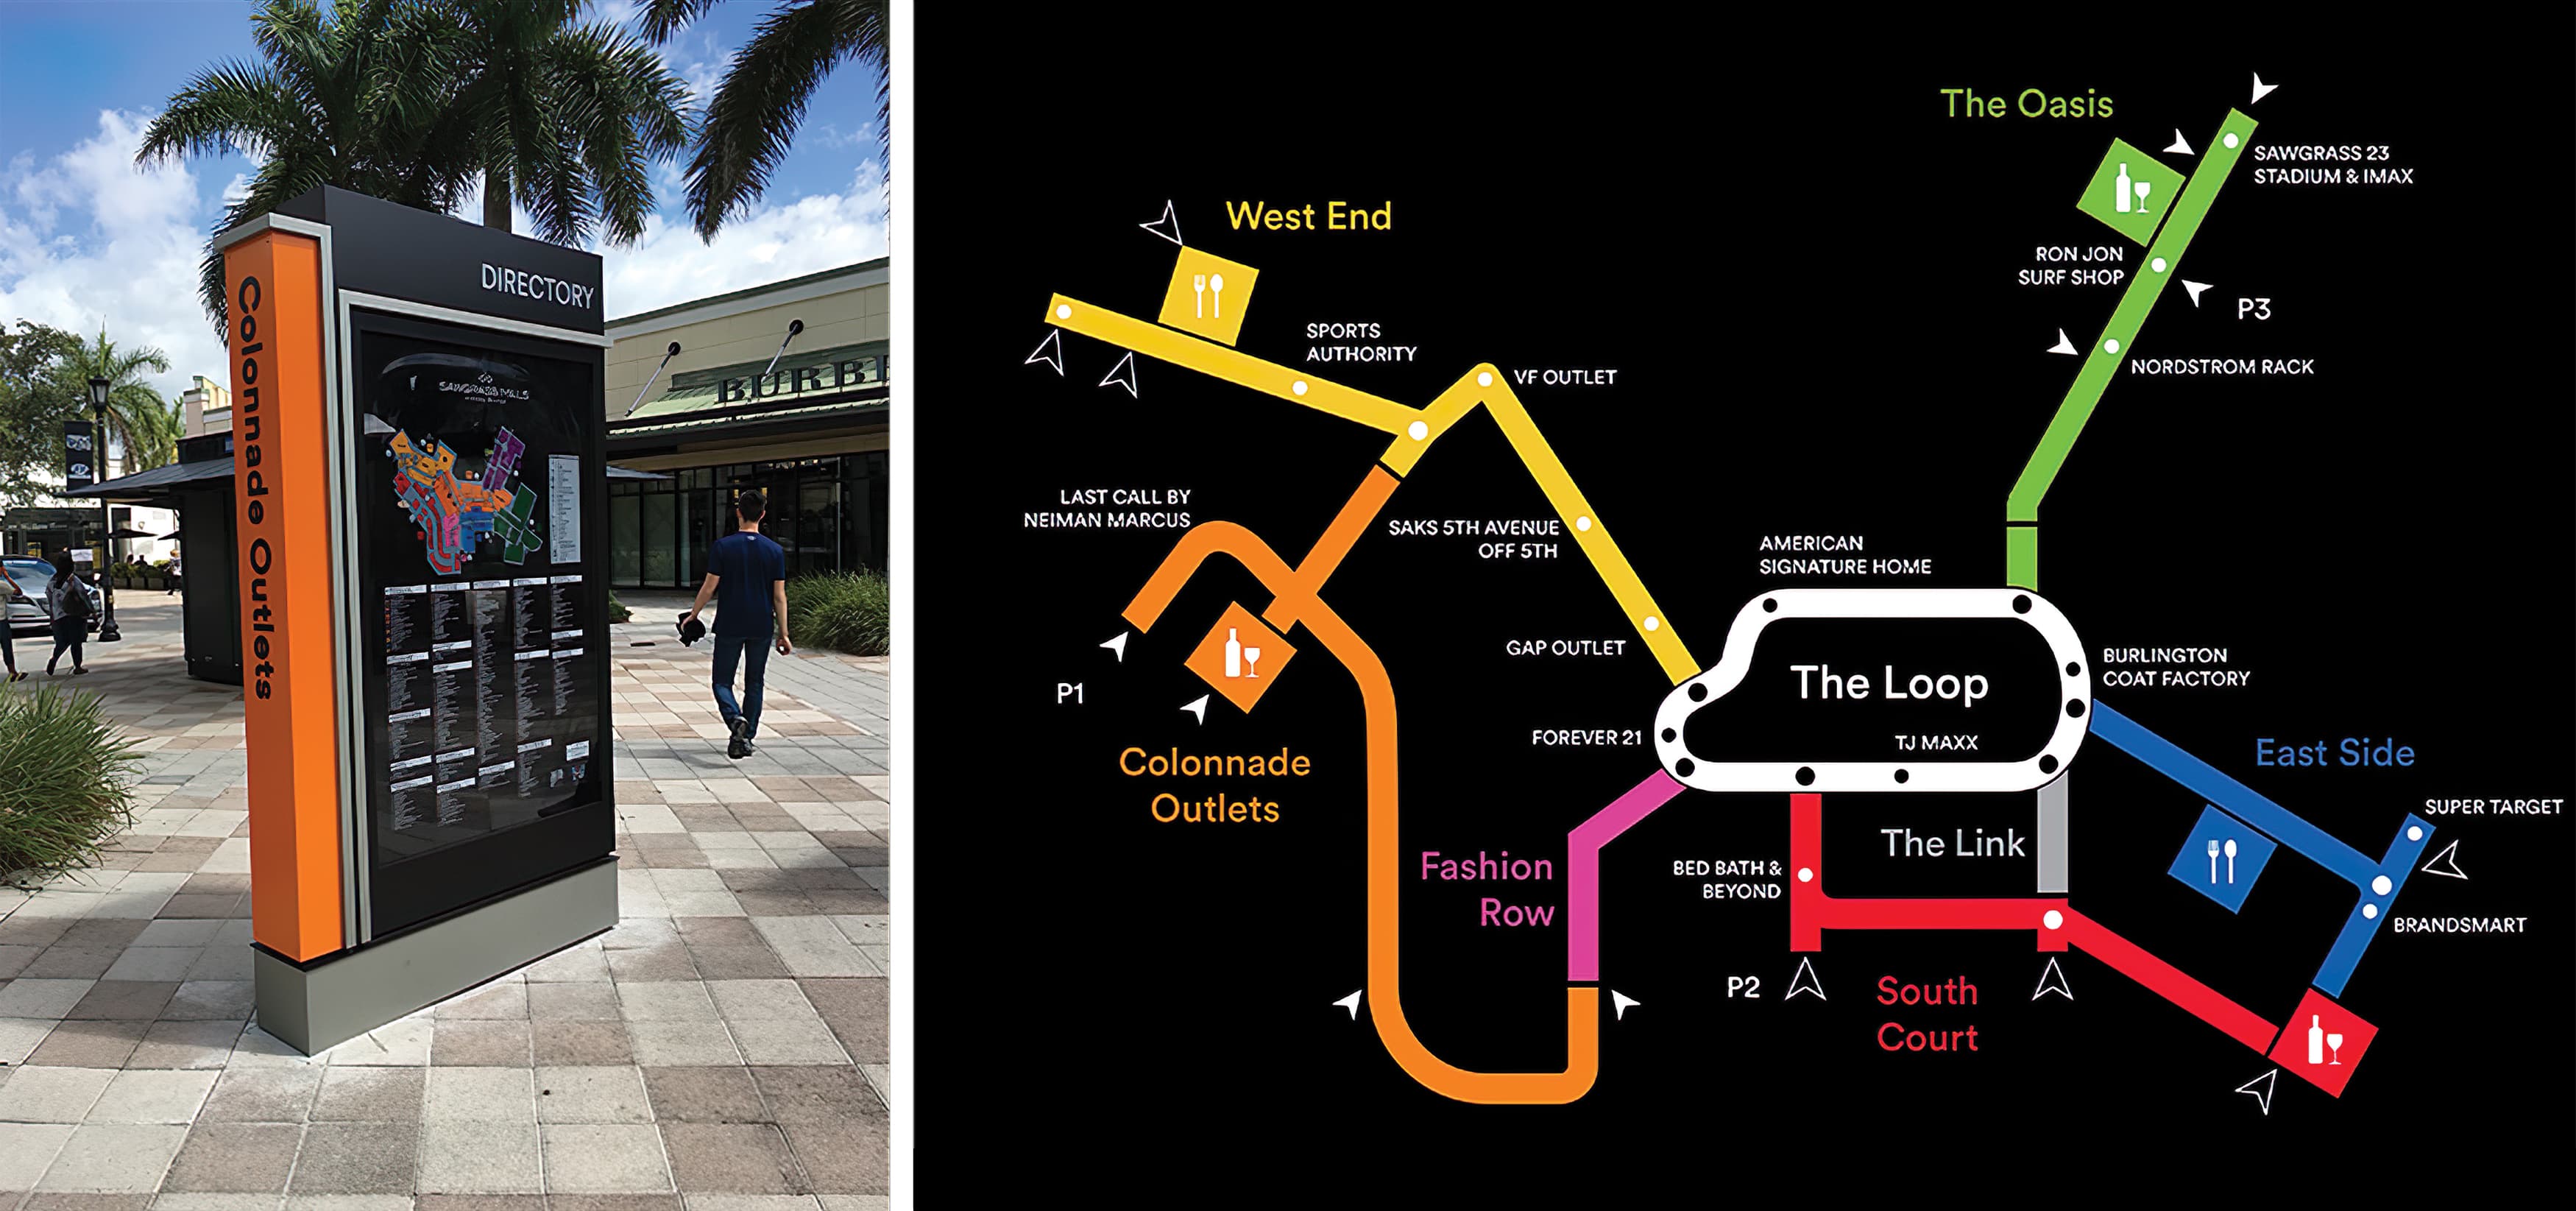 RSM Design worked to develop wayfinding signage, environmental graphics, and placemaking elements for Sawgrass Mills, a Simon Center located in Sunrise, Florida. Retail Directory.